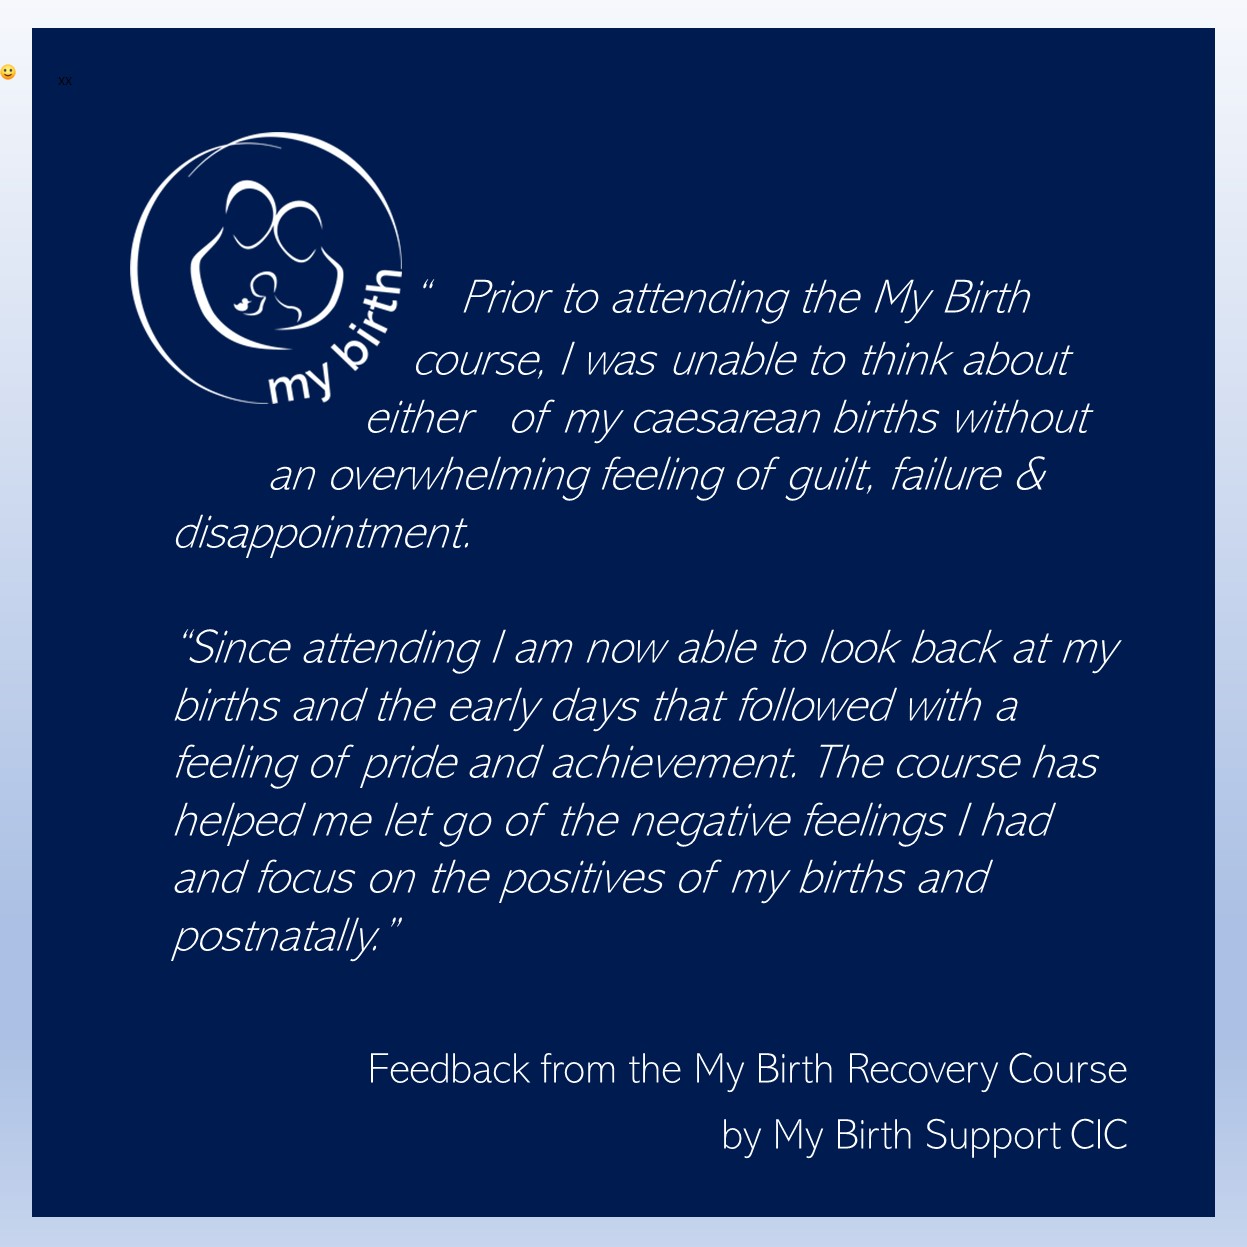 Prior to attending the My Birth 						course, I was unable to think about 					either 	of my caesarean births without 		an overwhelming feeling of guilt, failure & disappointment.
 
“Since attending I am now able to look back at my births and the early days that followed with a feeling of pride and achievement. The course has helped me let go of the negative feelings I had and focus on the positives of my births and postnatally.”
Feedback from the My Birth Recovery Course by My Birth Support CIC